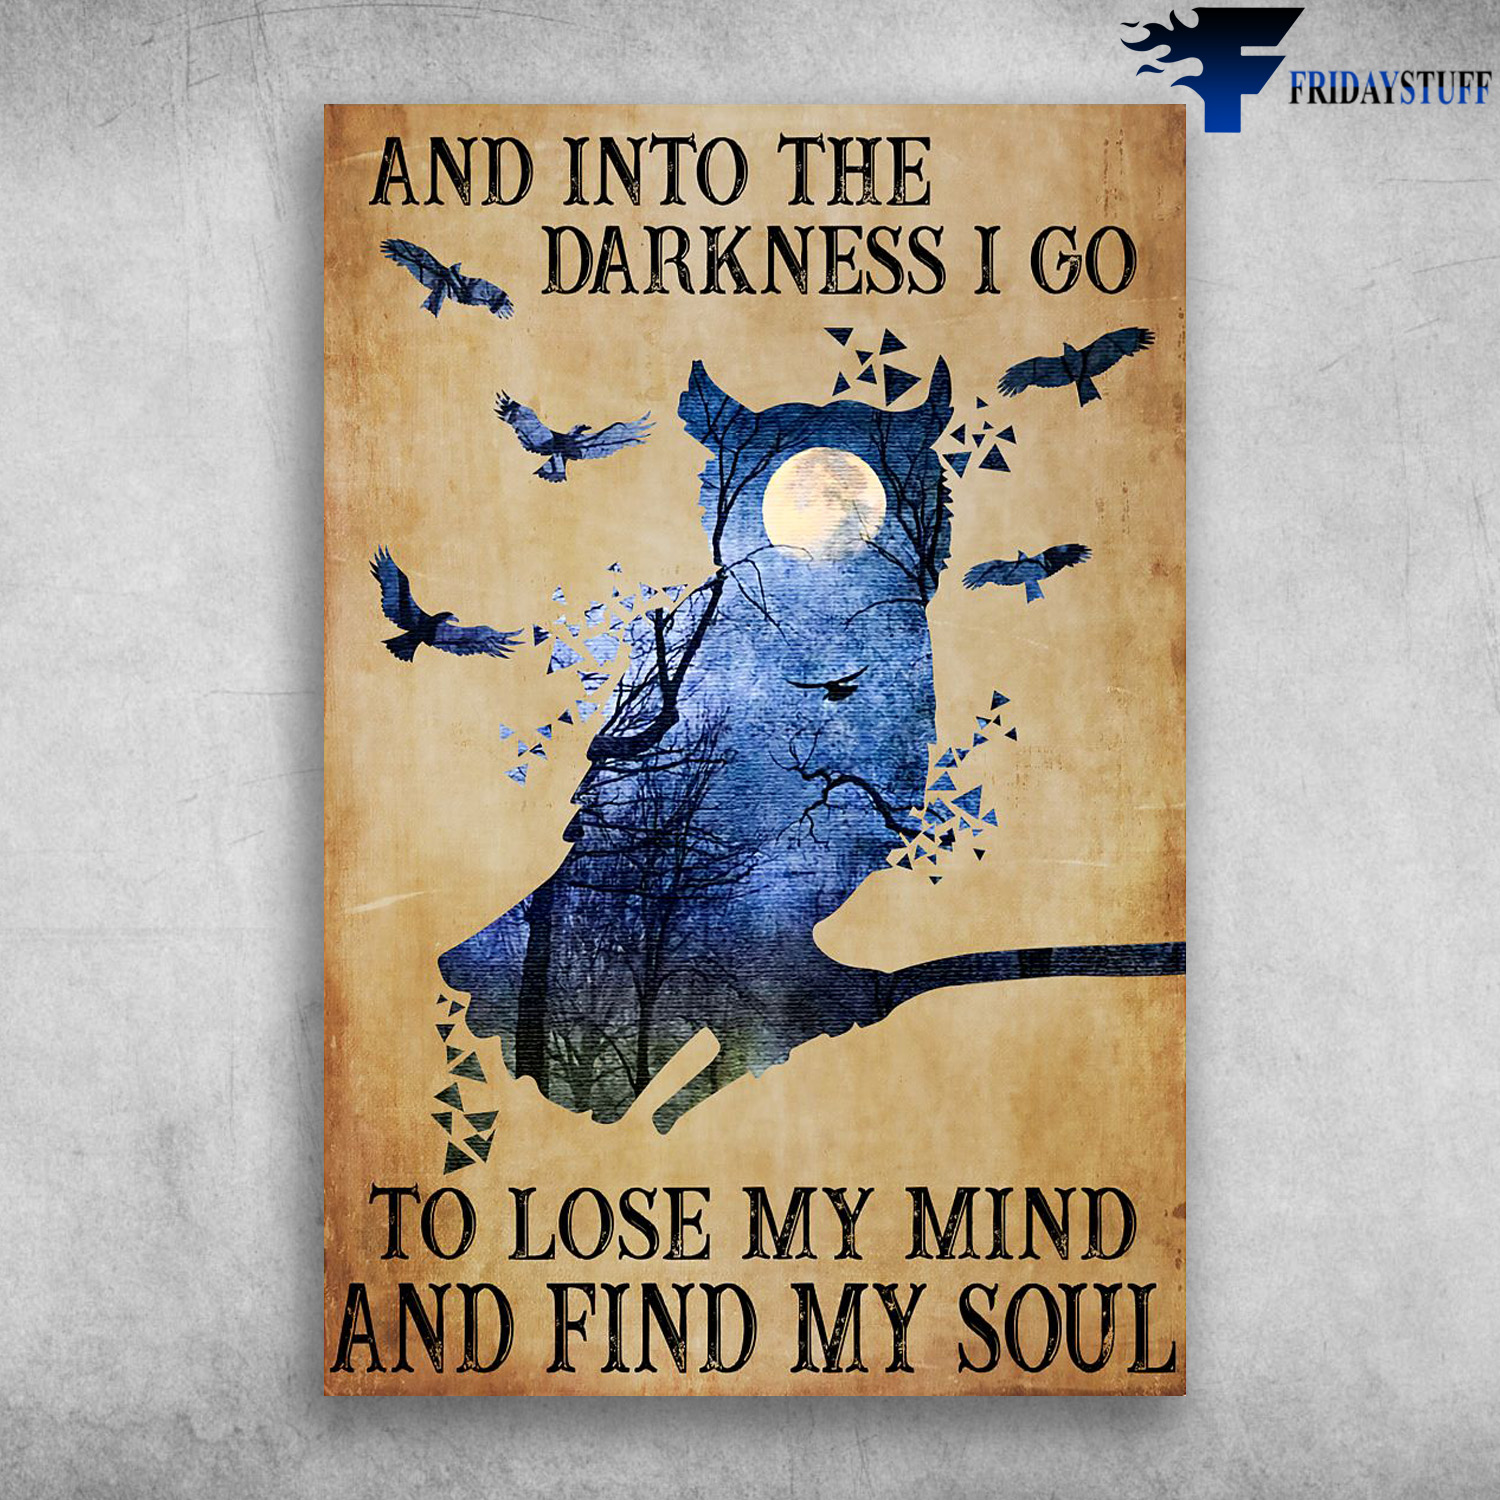 Owl Into The Darkness - And Into The Darkness I Go, To Lose My Mind And Find My Soul